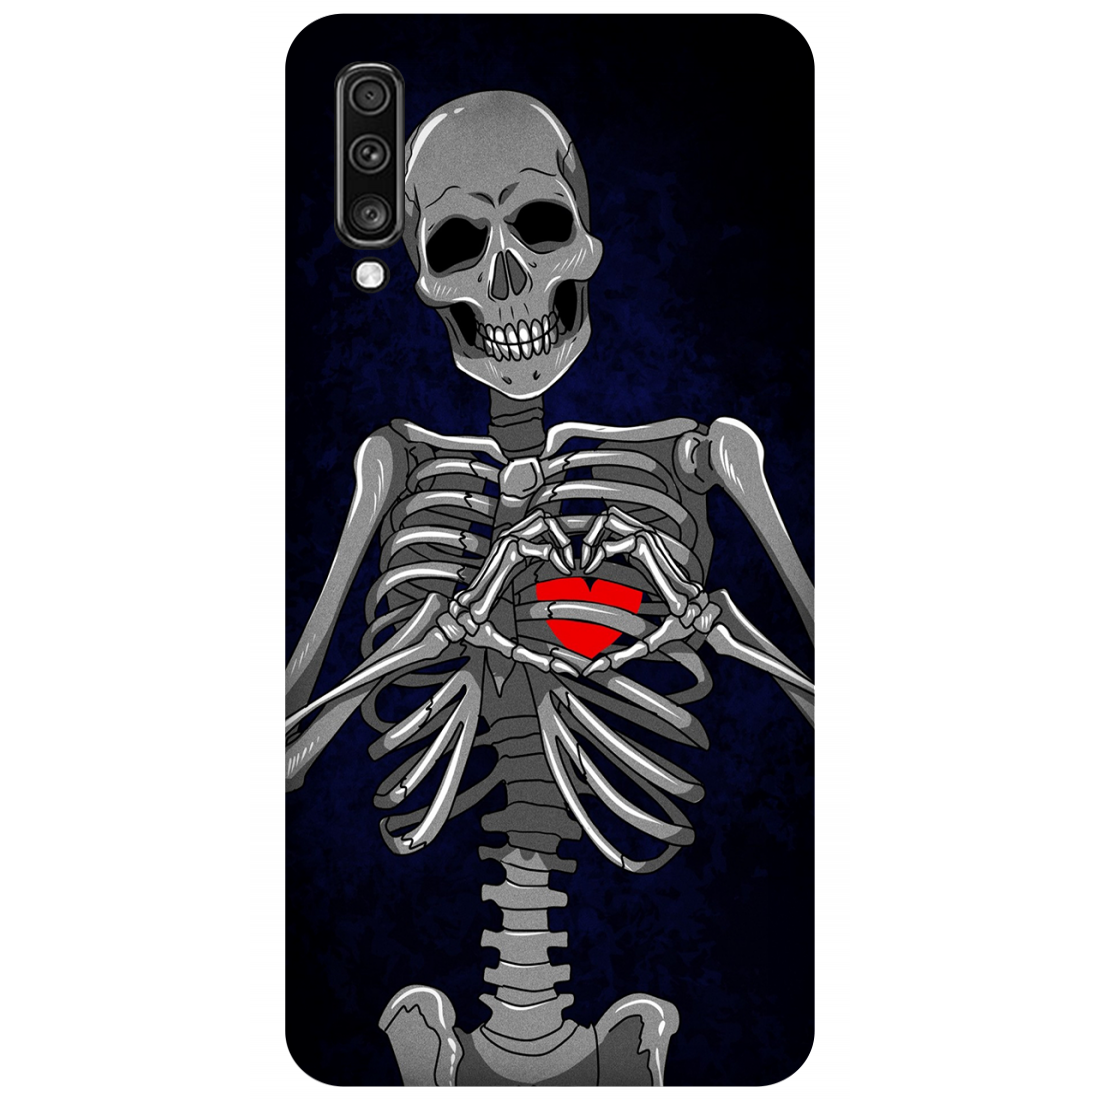 Embracing Skeleton with a Heart Case Samsung Galaxy A70